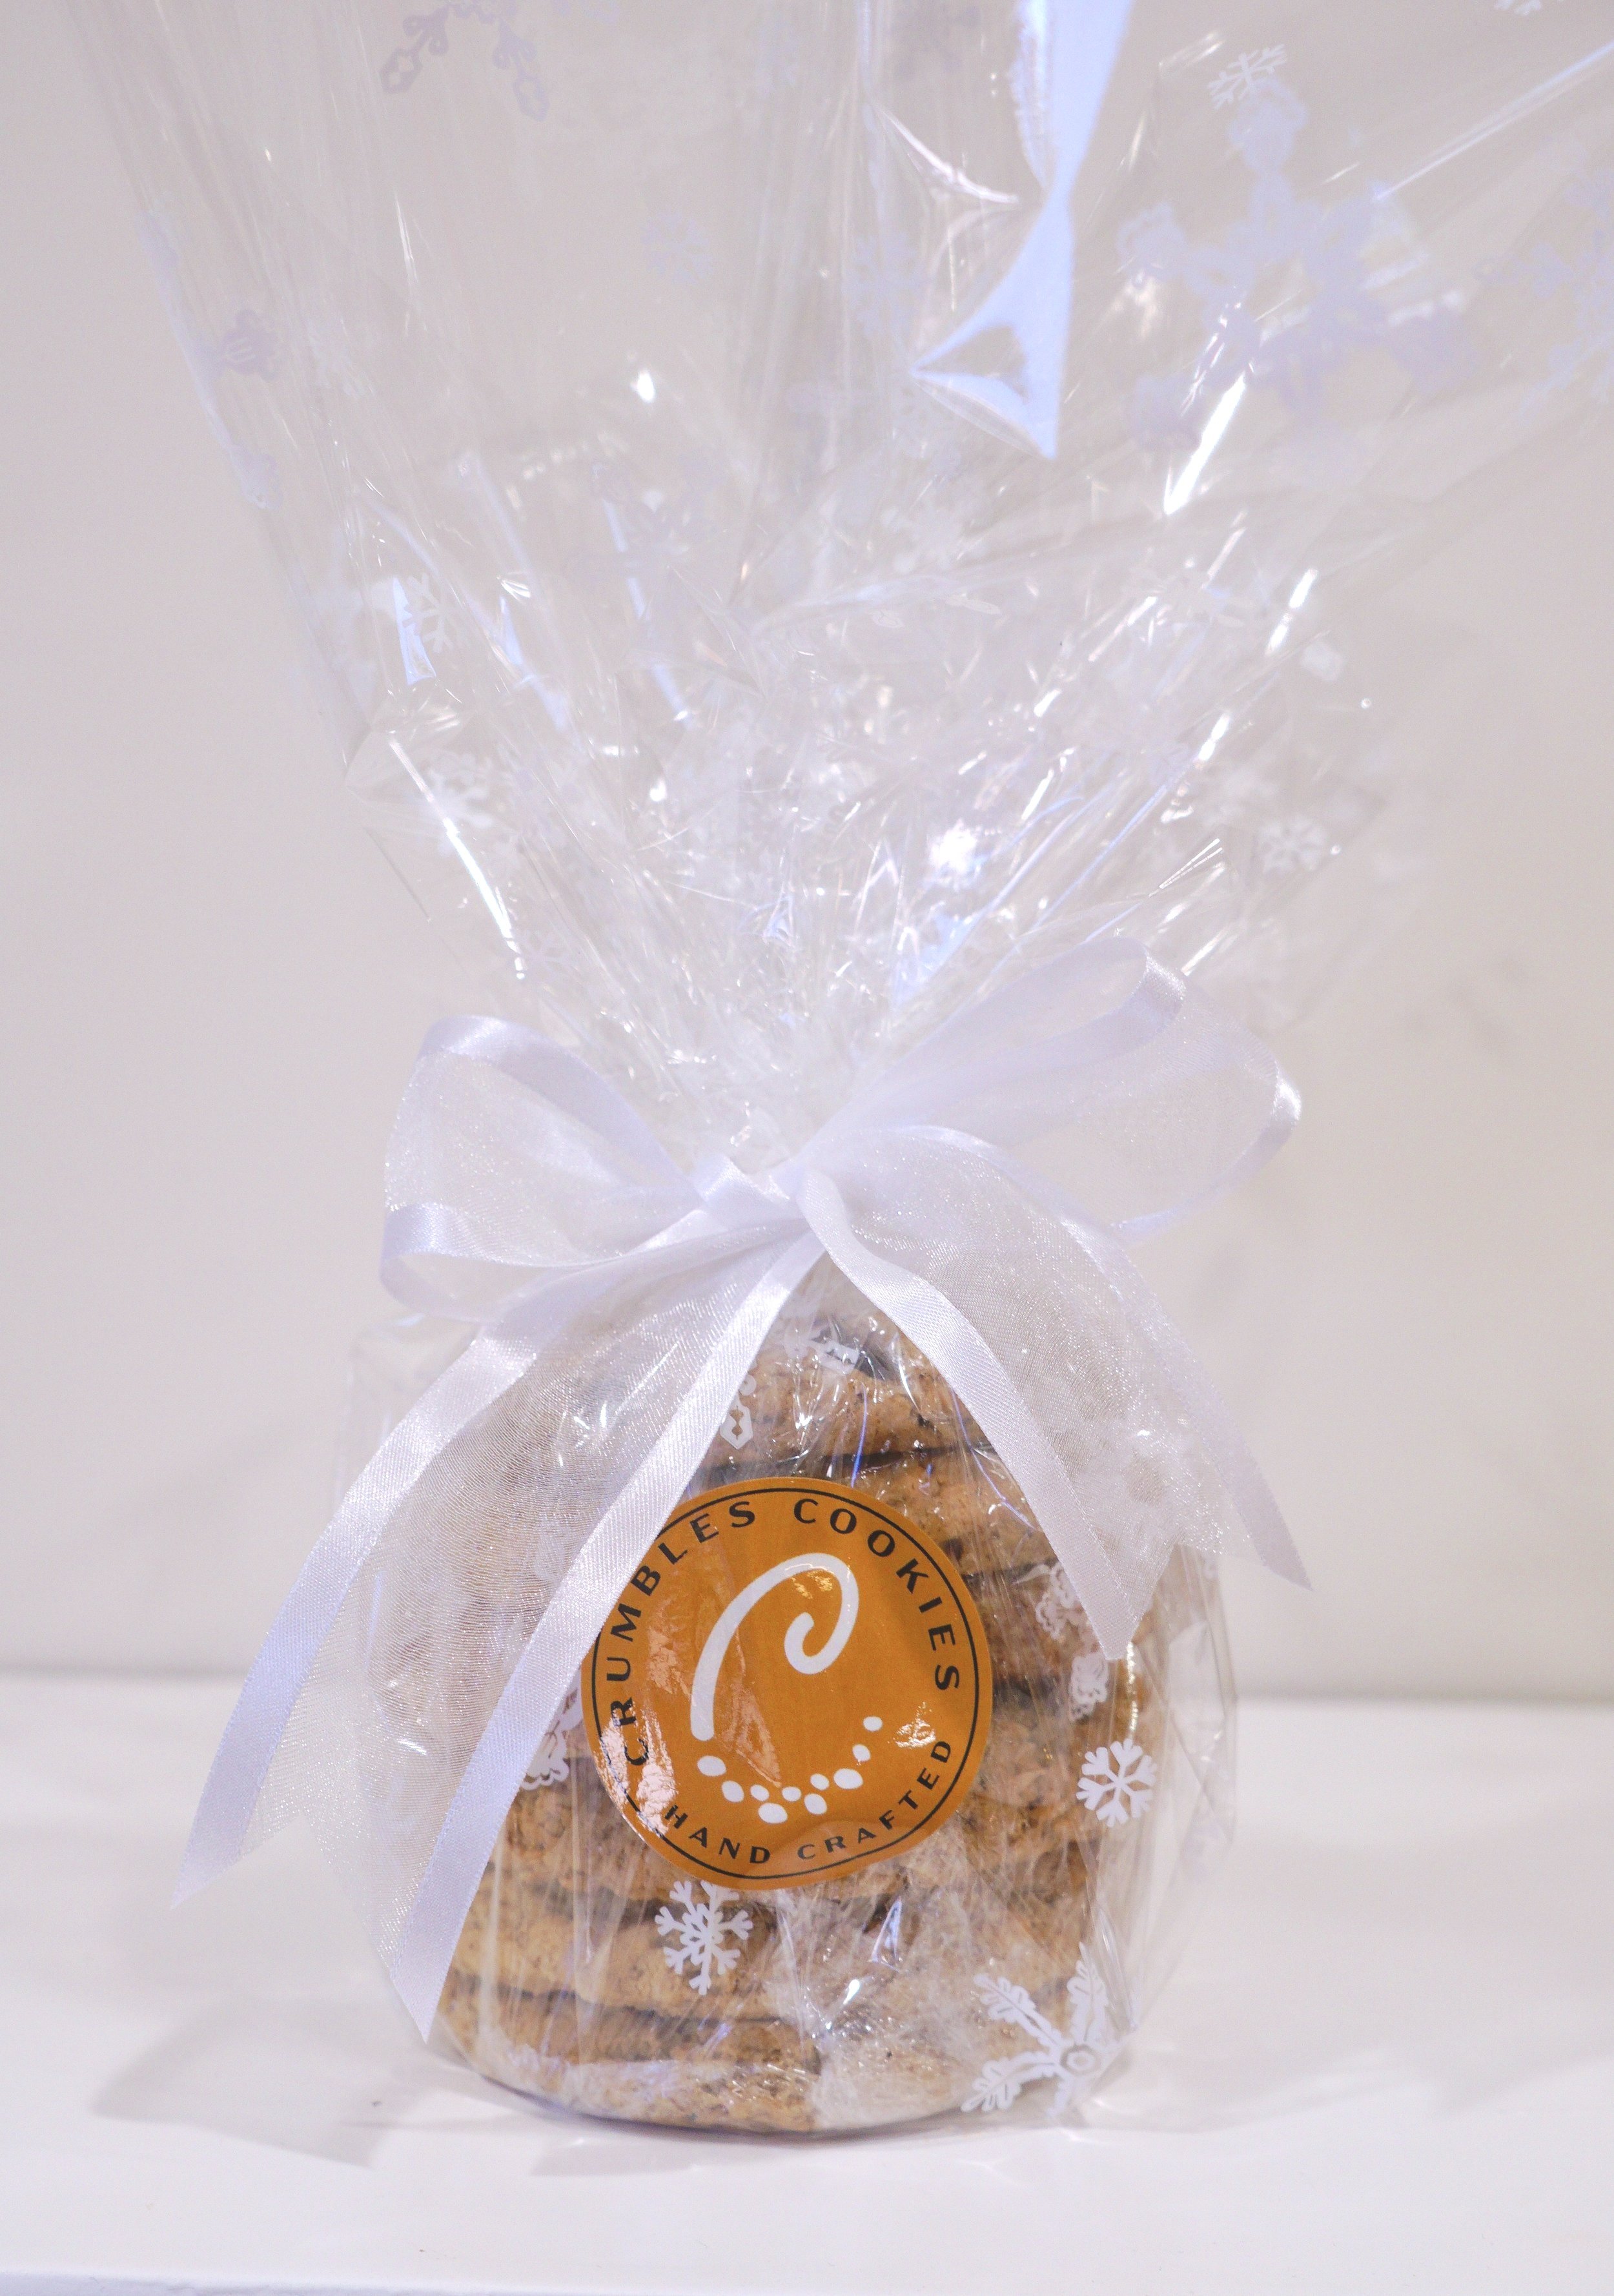 Comfort Cookies - decorative gift bags crystal clear cello bag